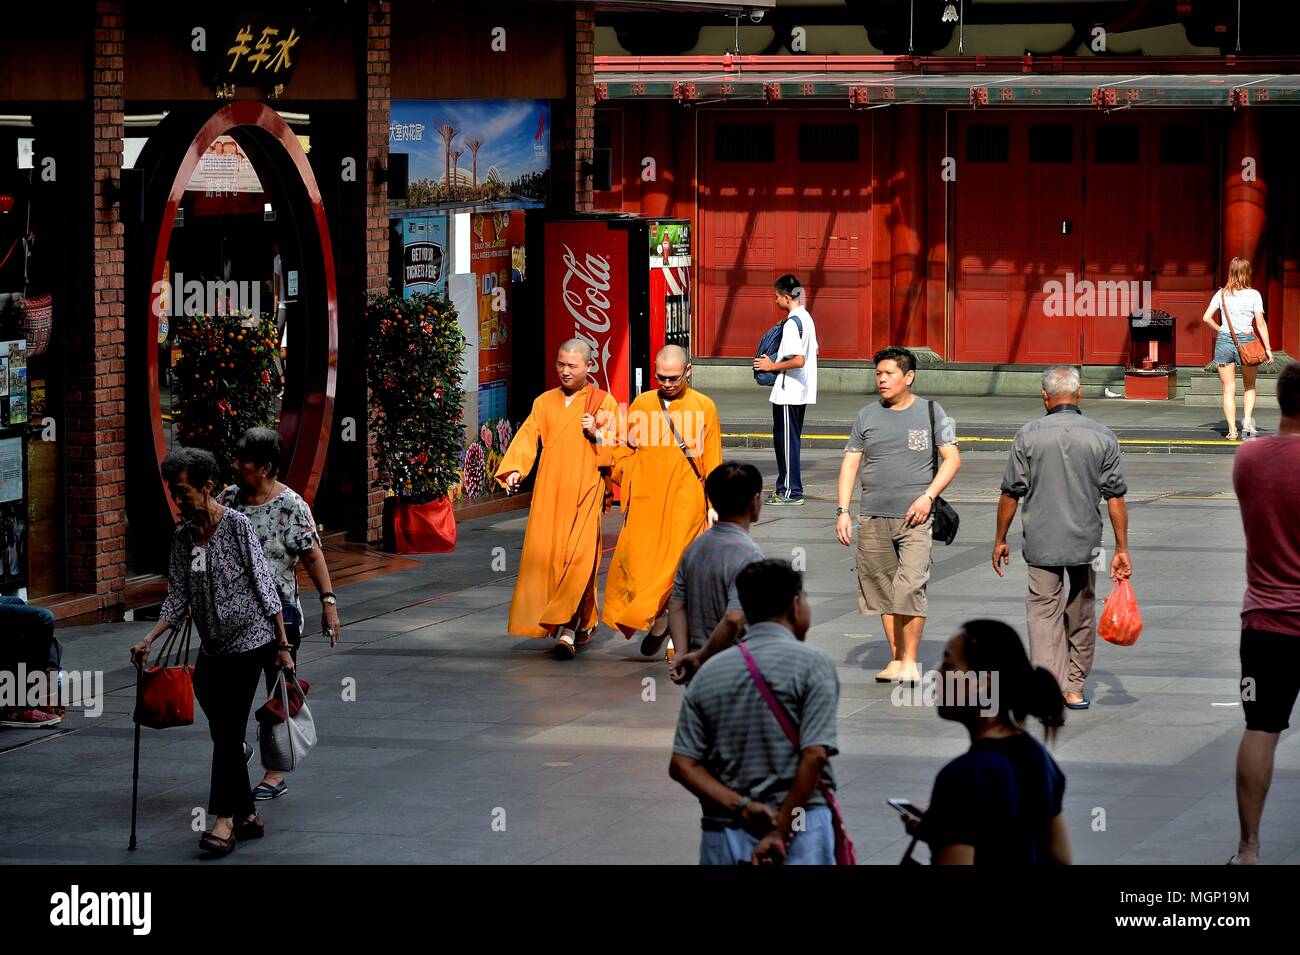 Two Buddhist monks in Saffron Robes walking across the plaza outside The Buddha Tooth Relic Temple in historic Chinatown, Singapore Stock Photo